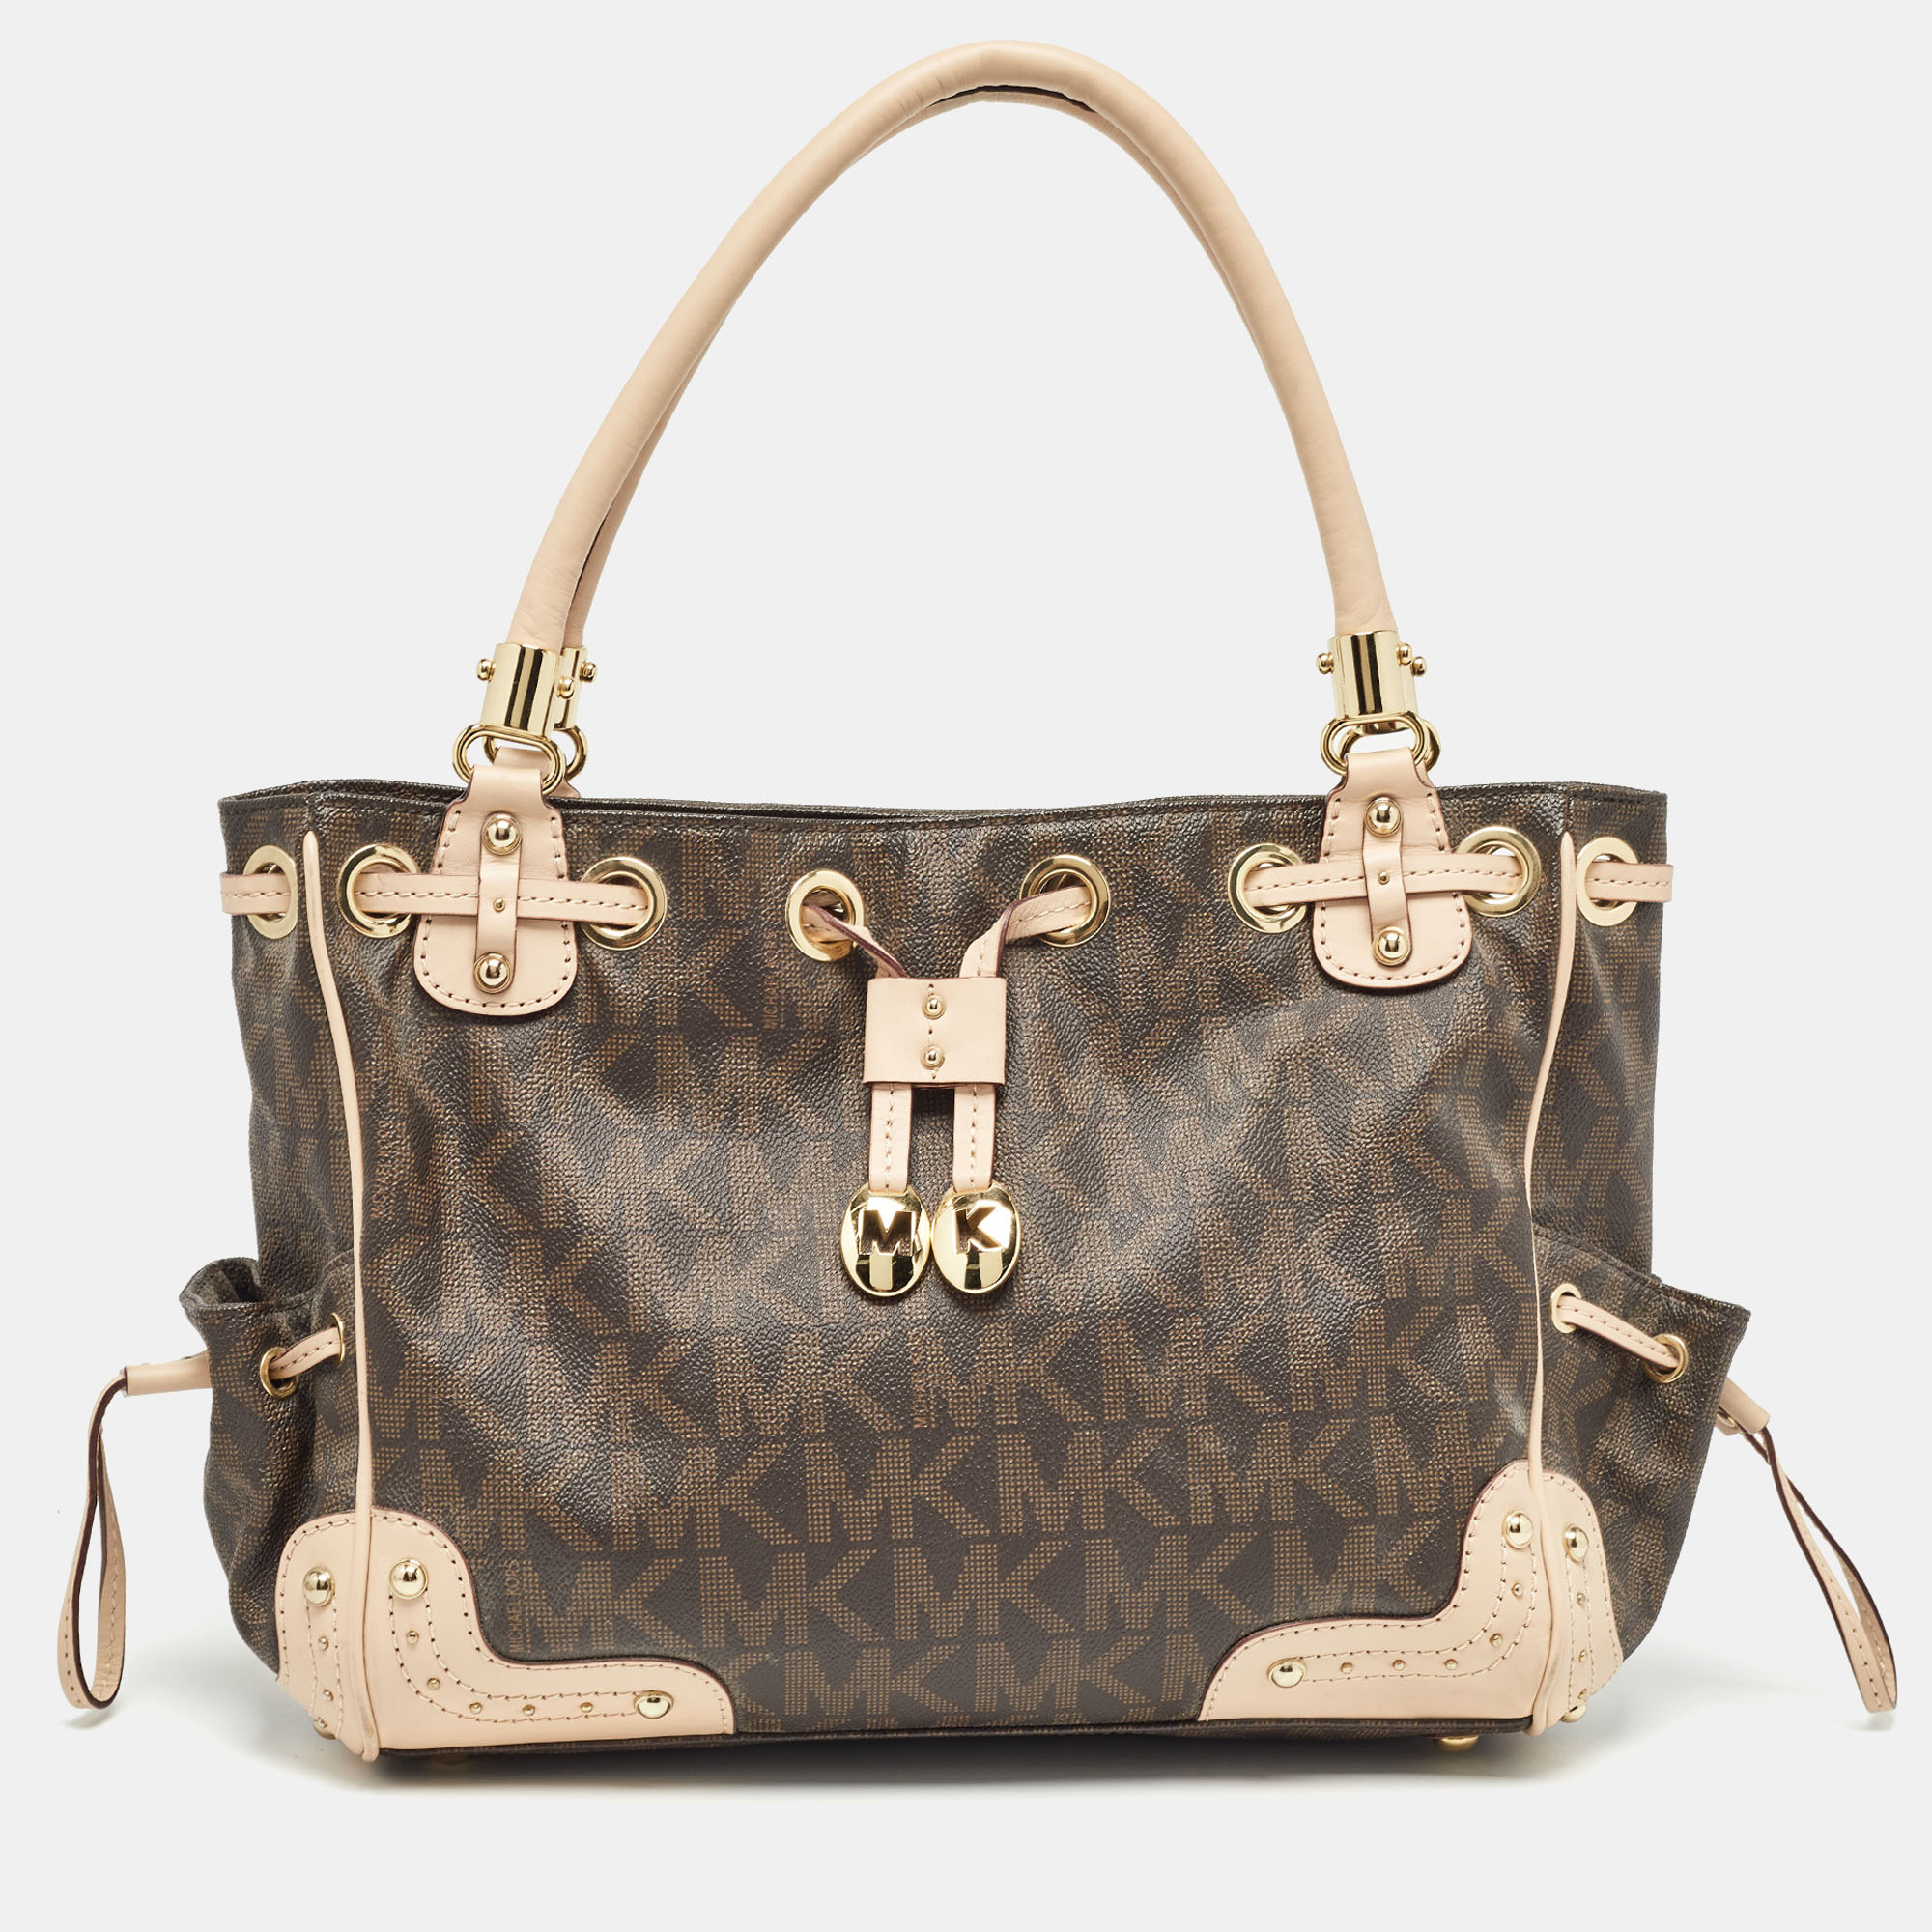 

Michael Kors Brown/Beige Monogram Coated Canvas and Leather Drawstring Bag